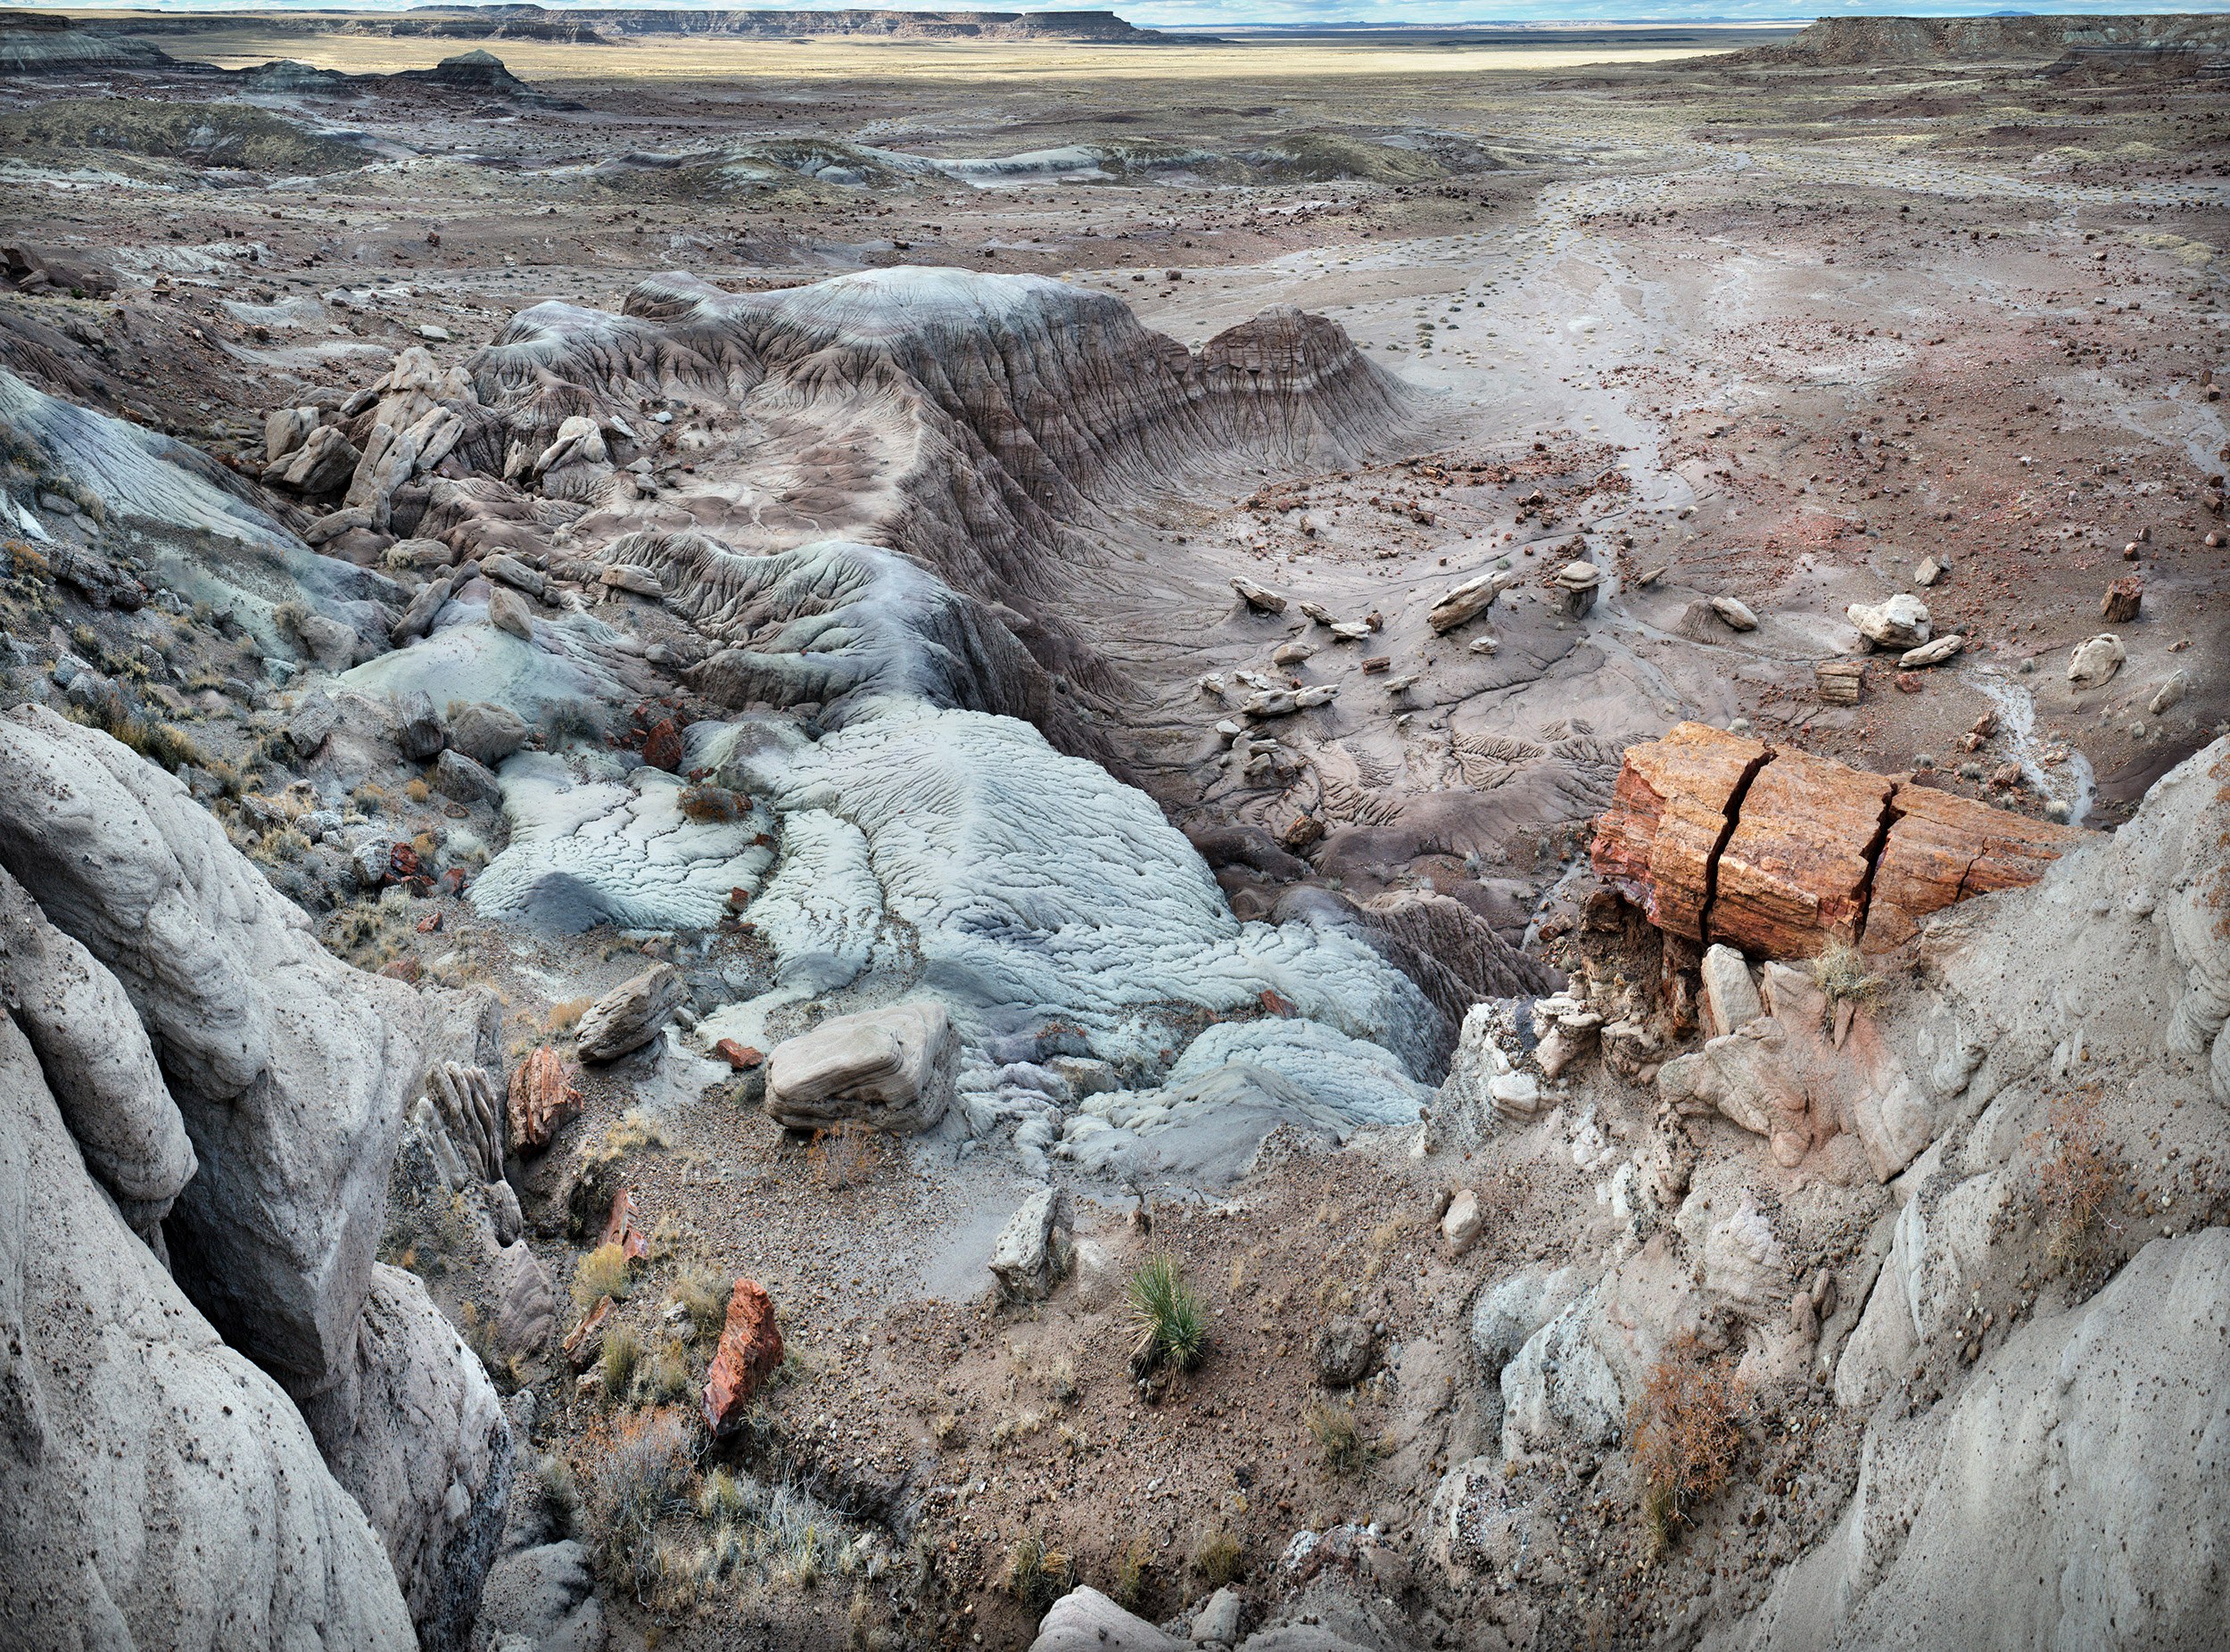 Chinle Formation, Petrified Forest National Park, Arizona